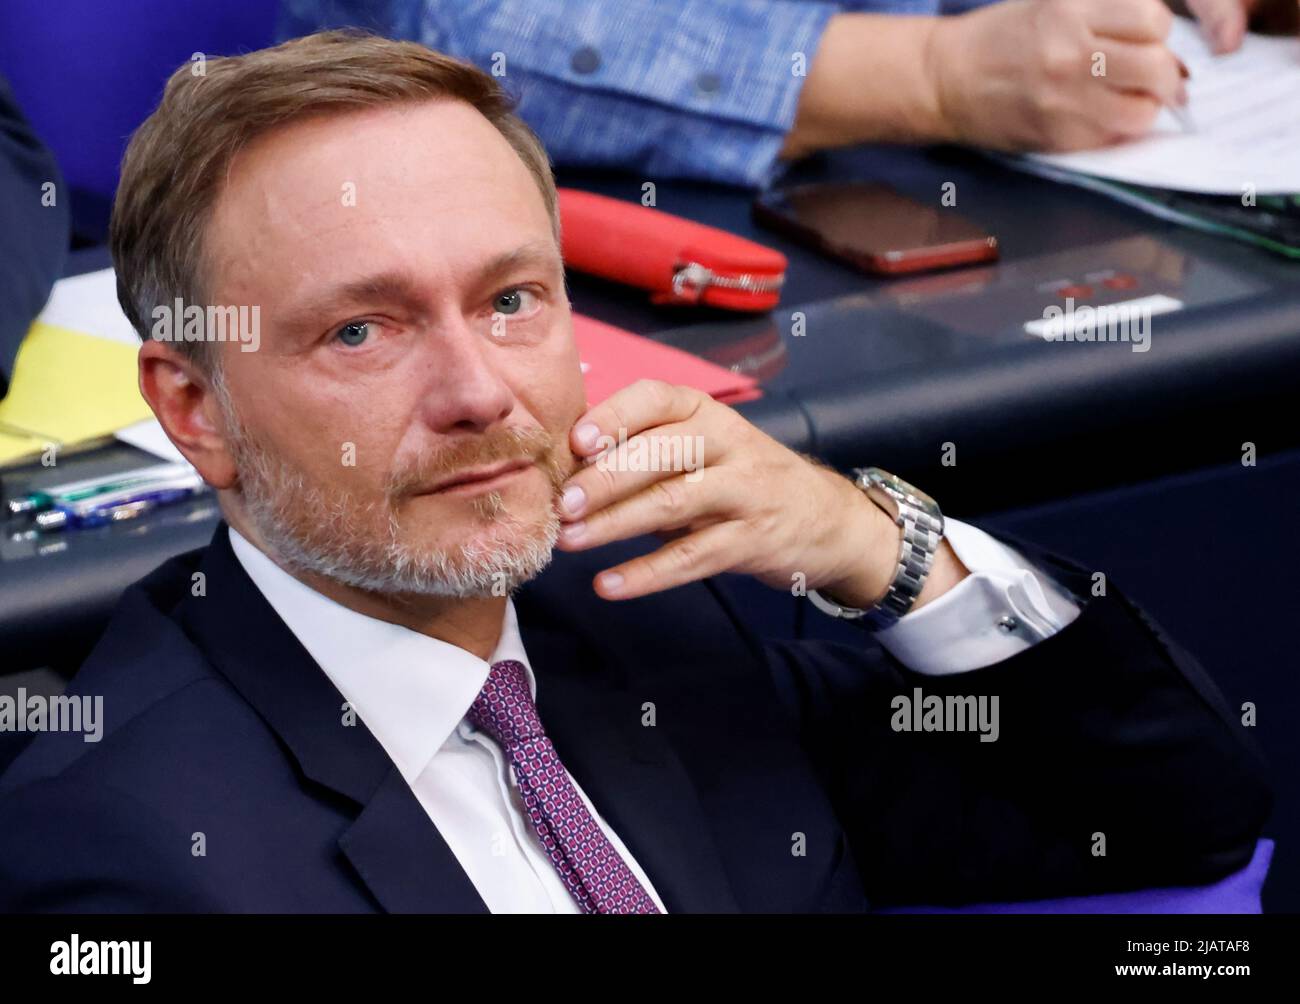 German Finance Minister Christian Lindner attends a session of Germany's lower house of parliament, the Bundestag, in Berlin, Germany June 1, 2022. REUTERS/Hannibal Hanschke Stock Photo